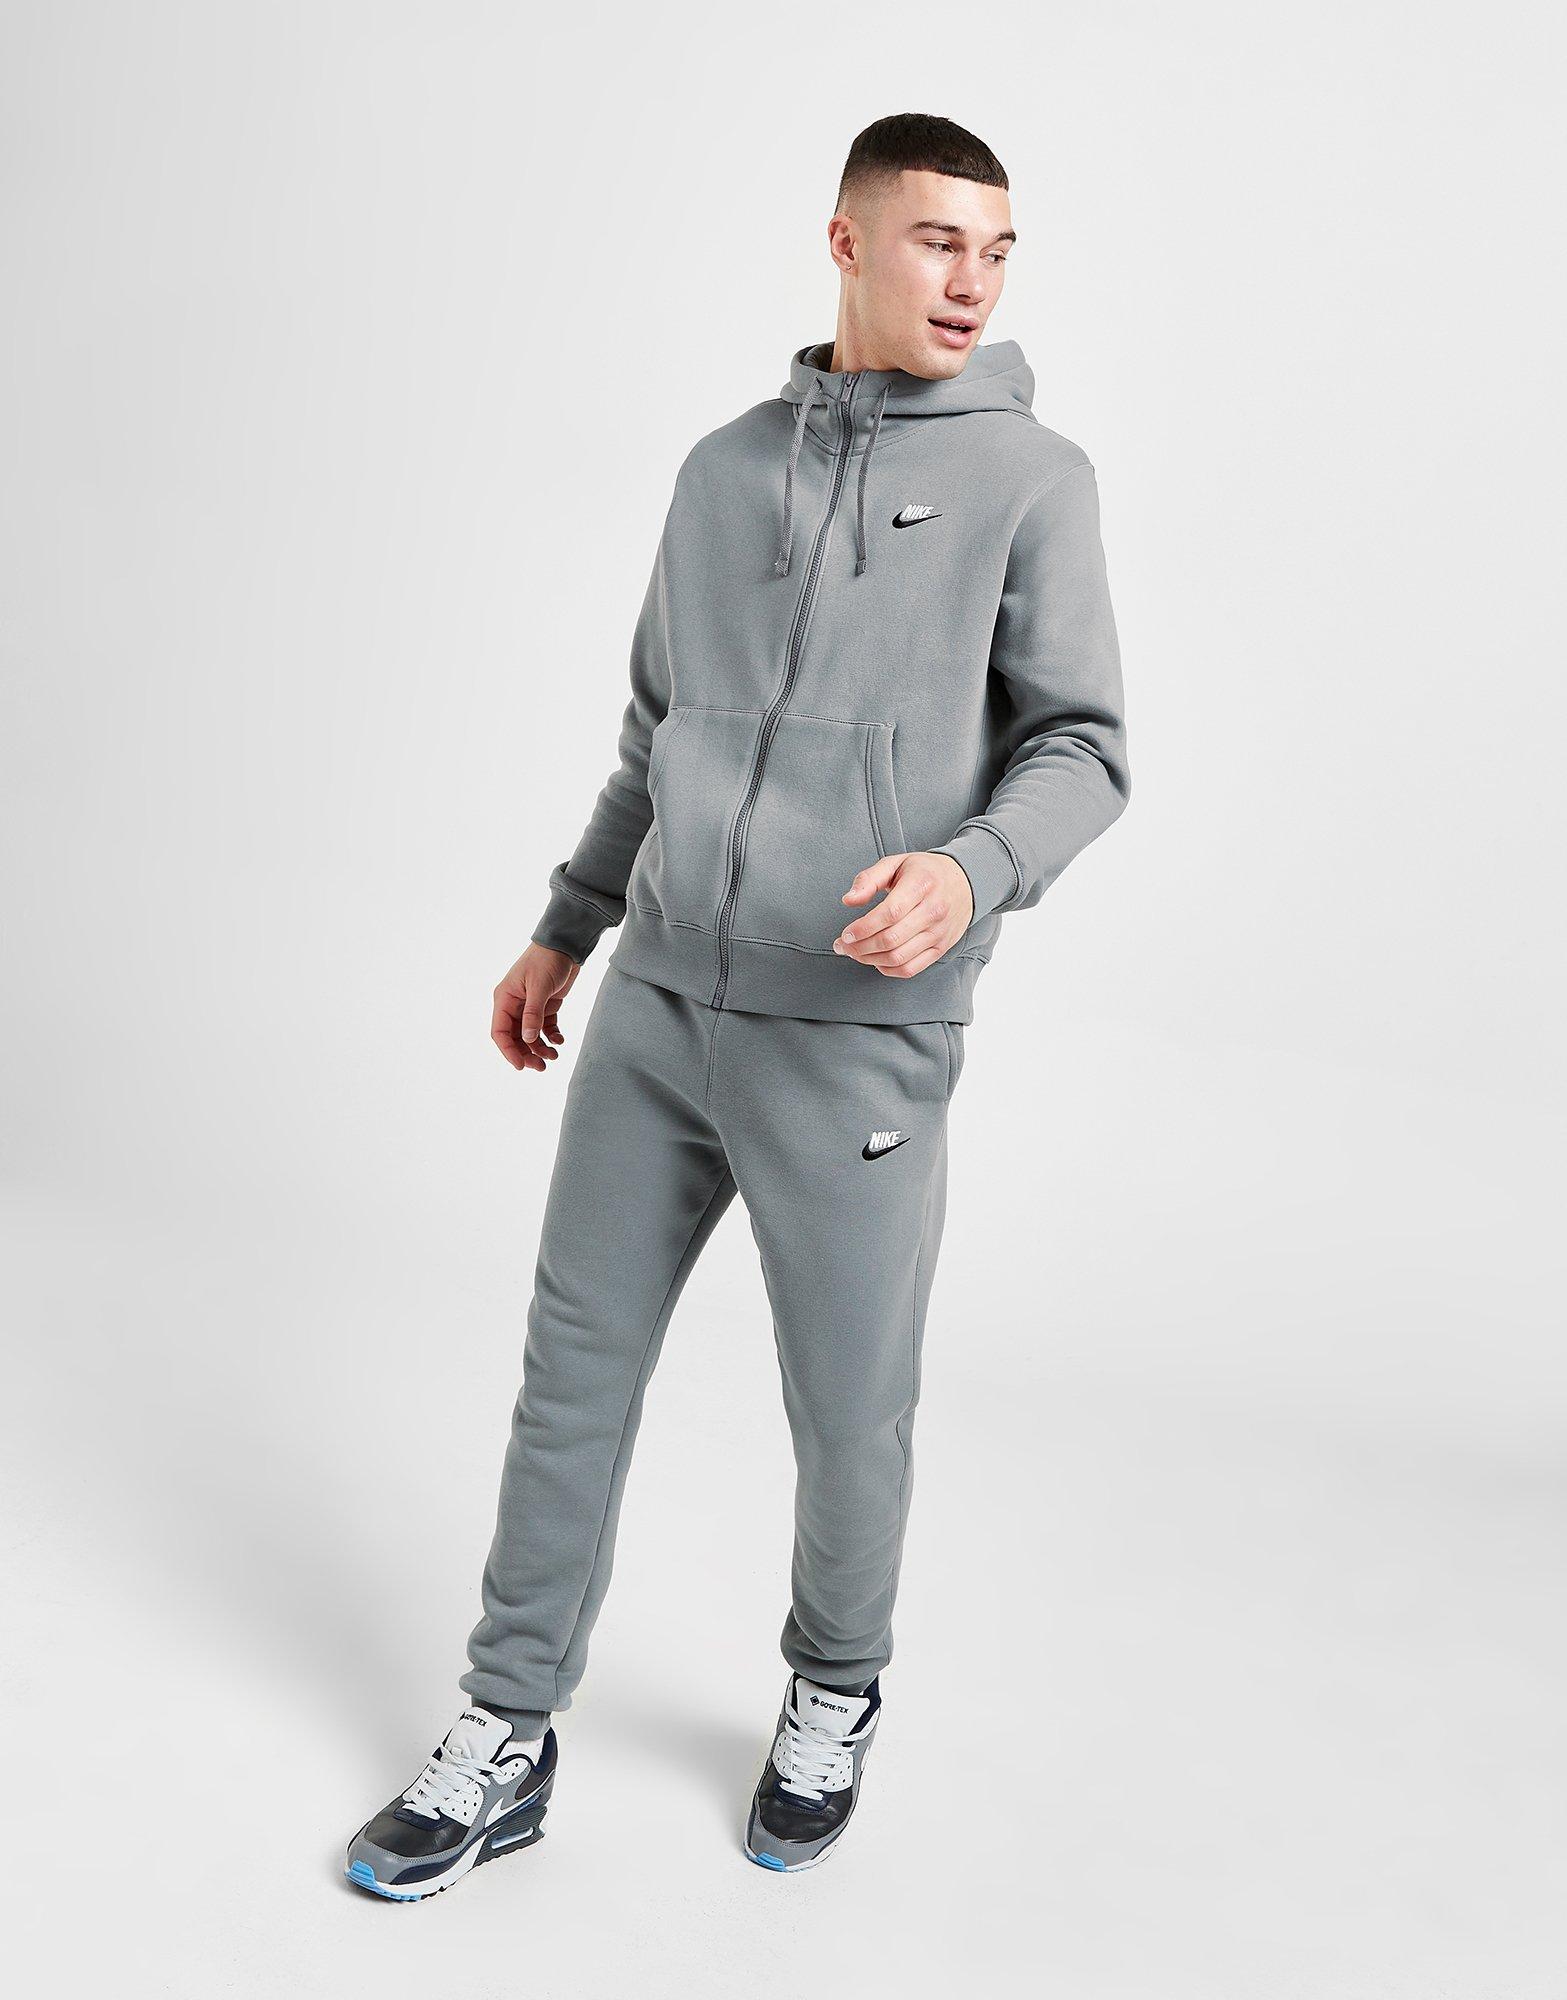 Tranquility Midler svælg Nike Foundation Hoodie Grey | escapeauthority.com